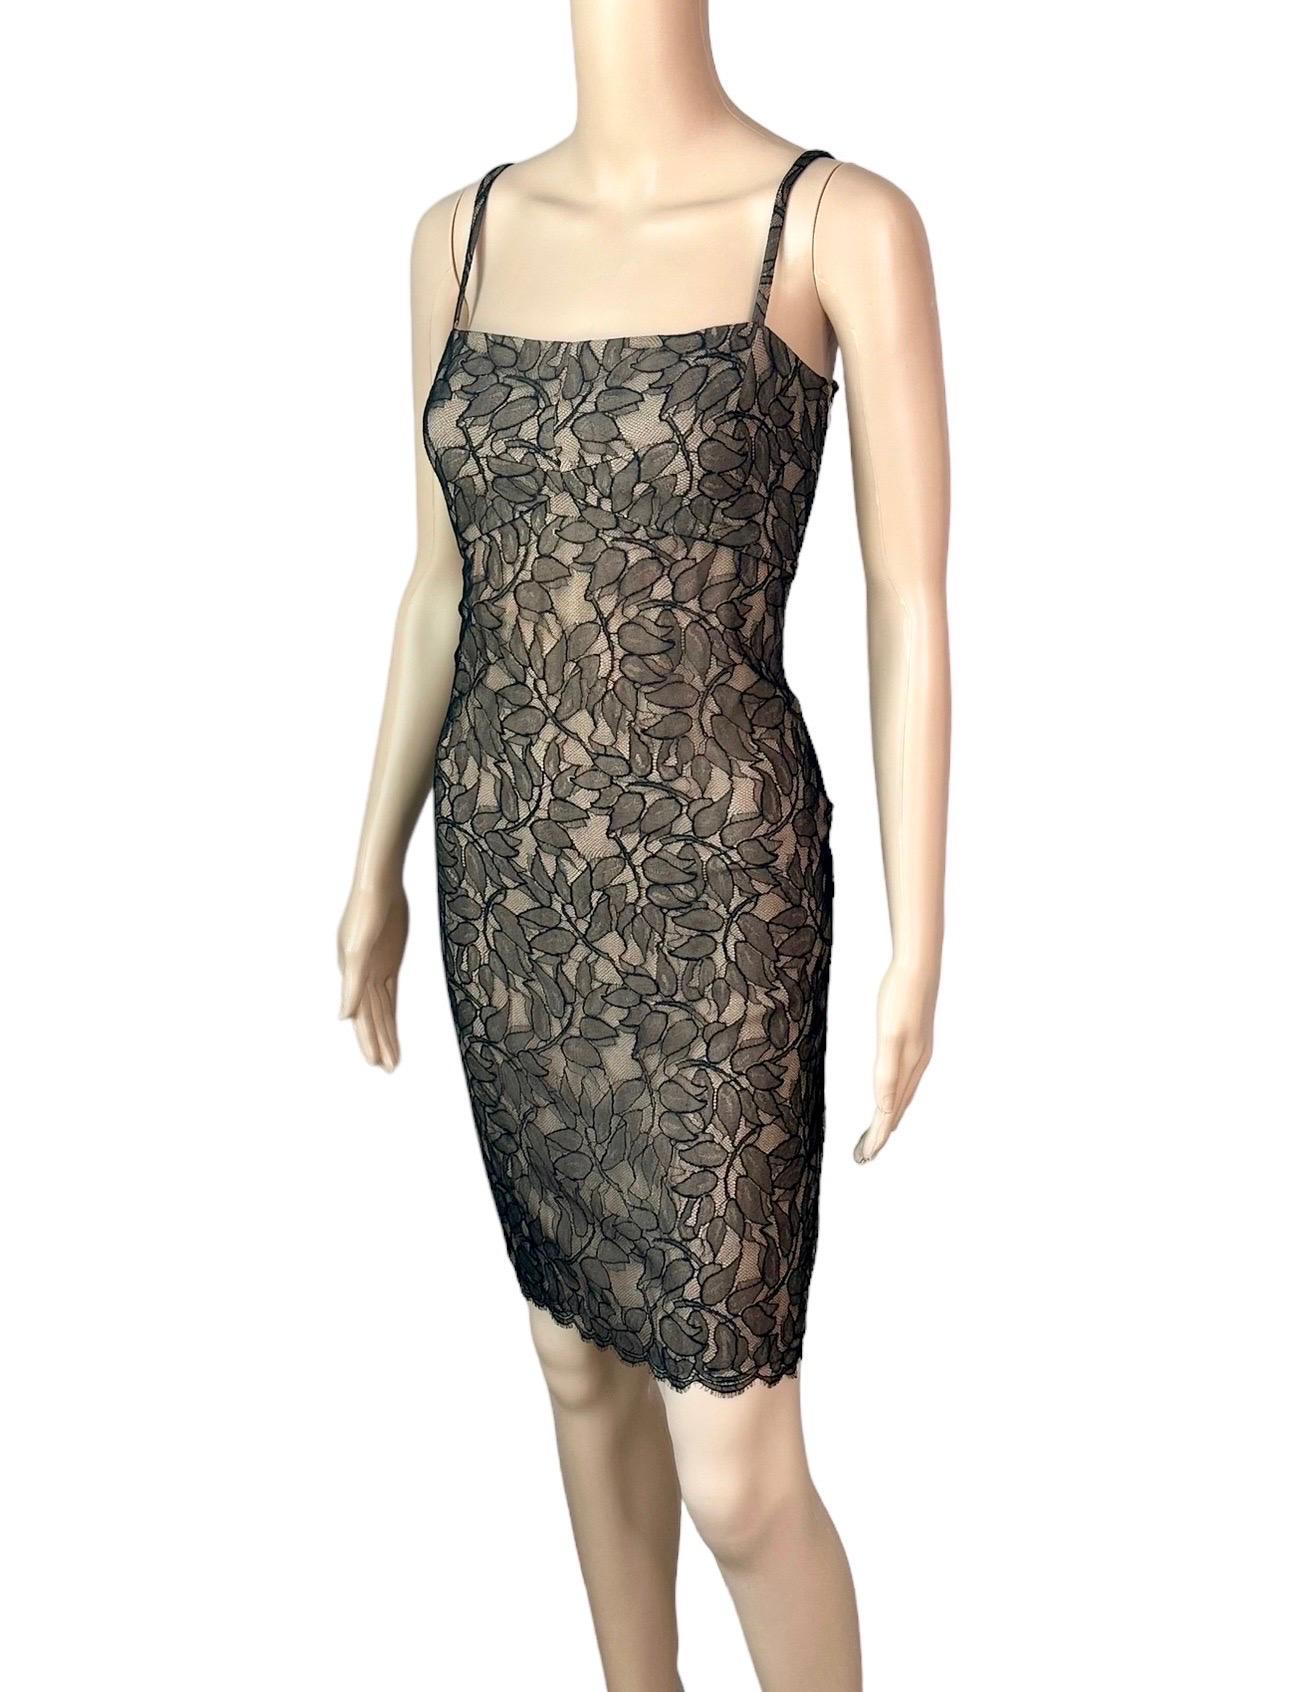 Gianni Versace Istante c. 1998 Sheer Lace Mini Dress In Good Condition For Sale In Naples, FL